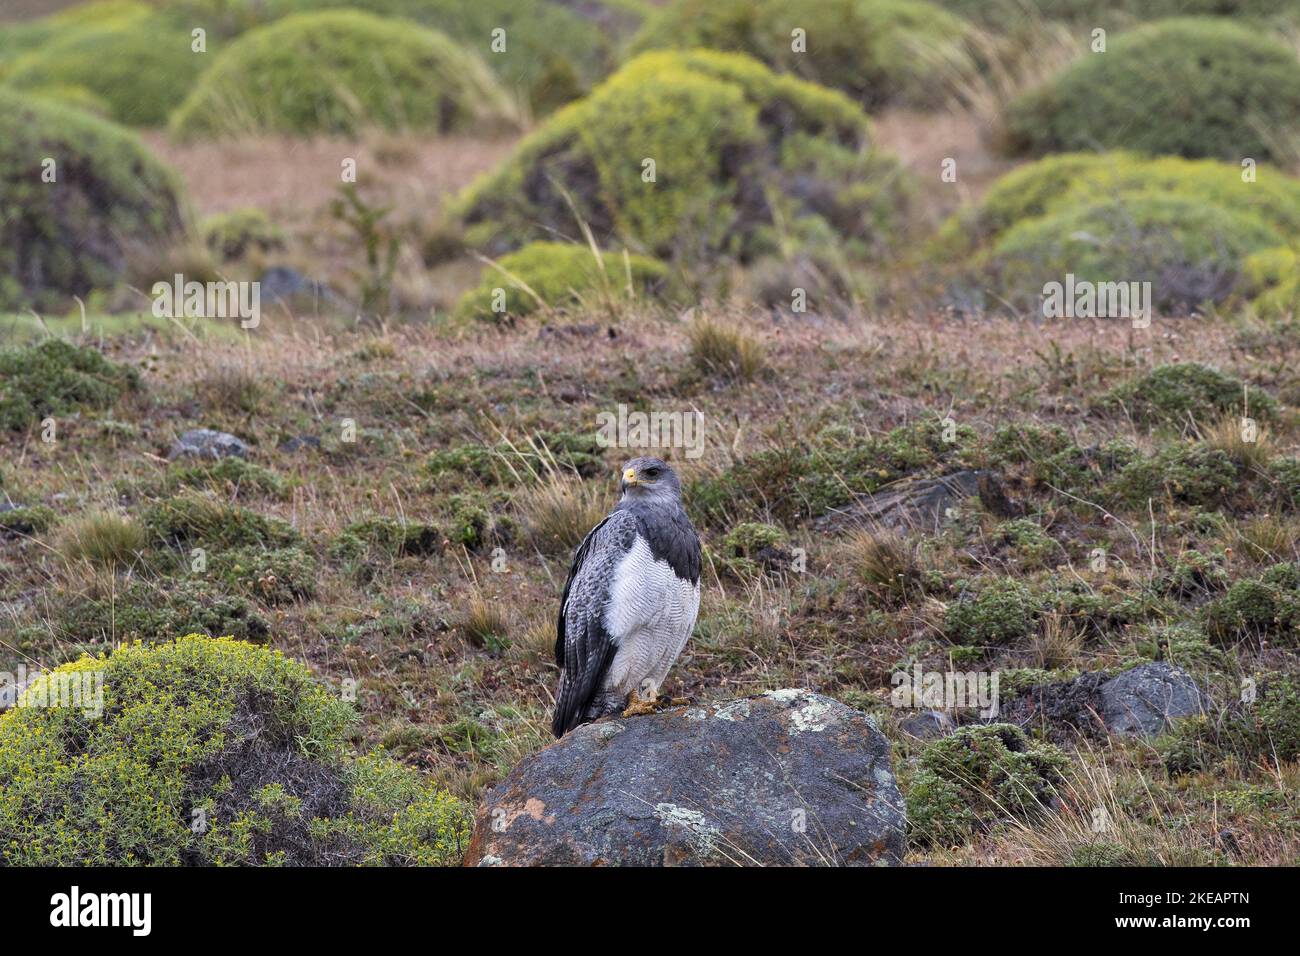 Black-chested buzzard eagle Geranoaetus melanoleucus perched on a rock amongst scrub Torres del Paine National Park Patagonia Chile South America Dece Stock Photo